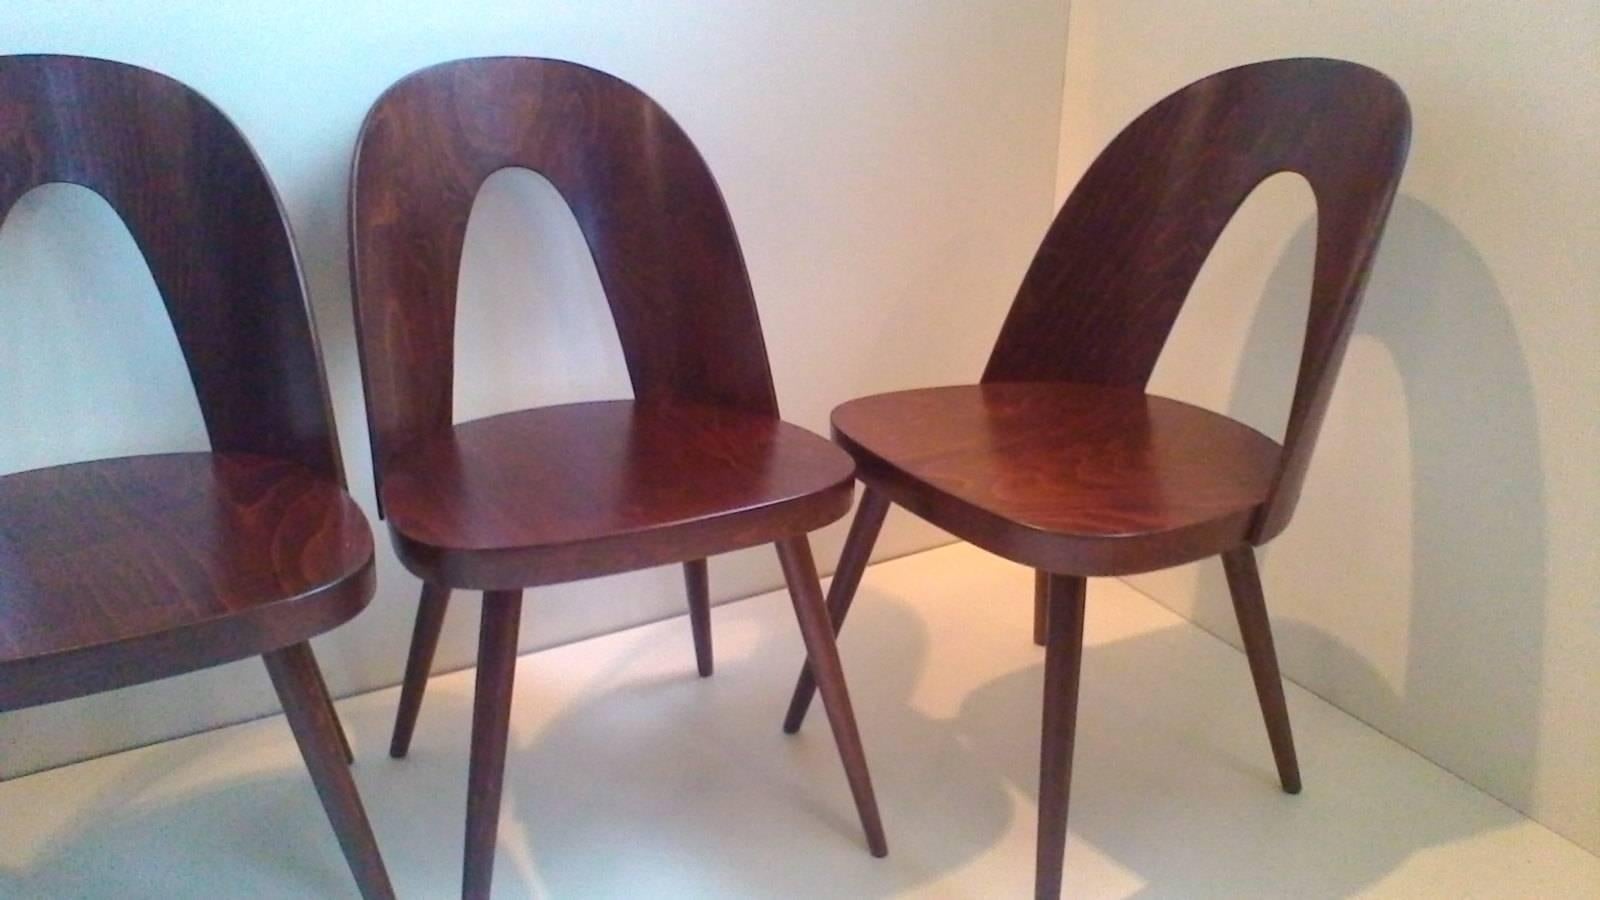 Those chairs were designed by Antonín Suman, produced by Tatra  Czechoslovakia in 1960's. Chairs are in very good restored condition.